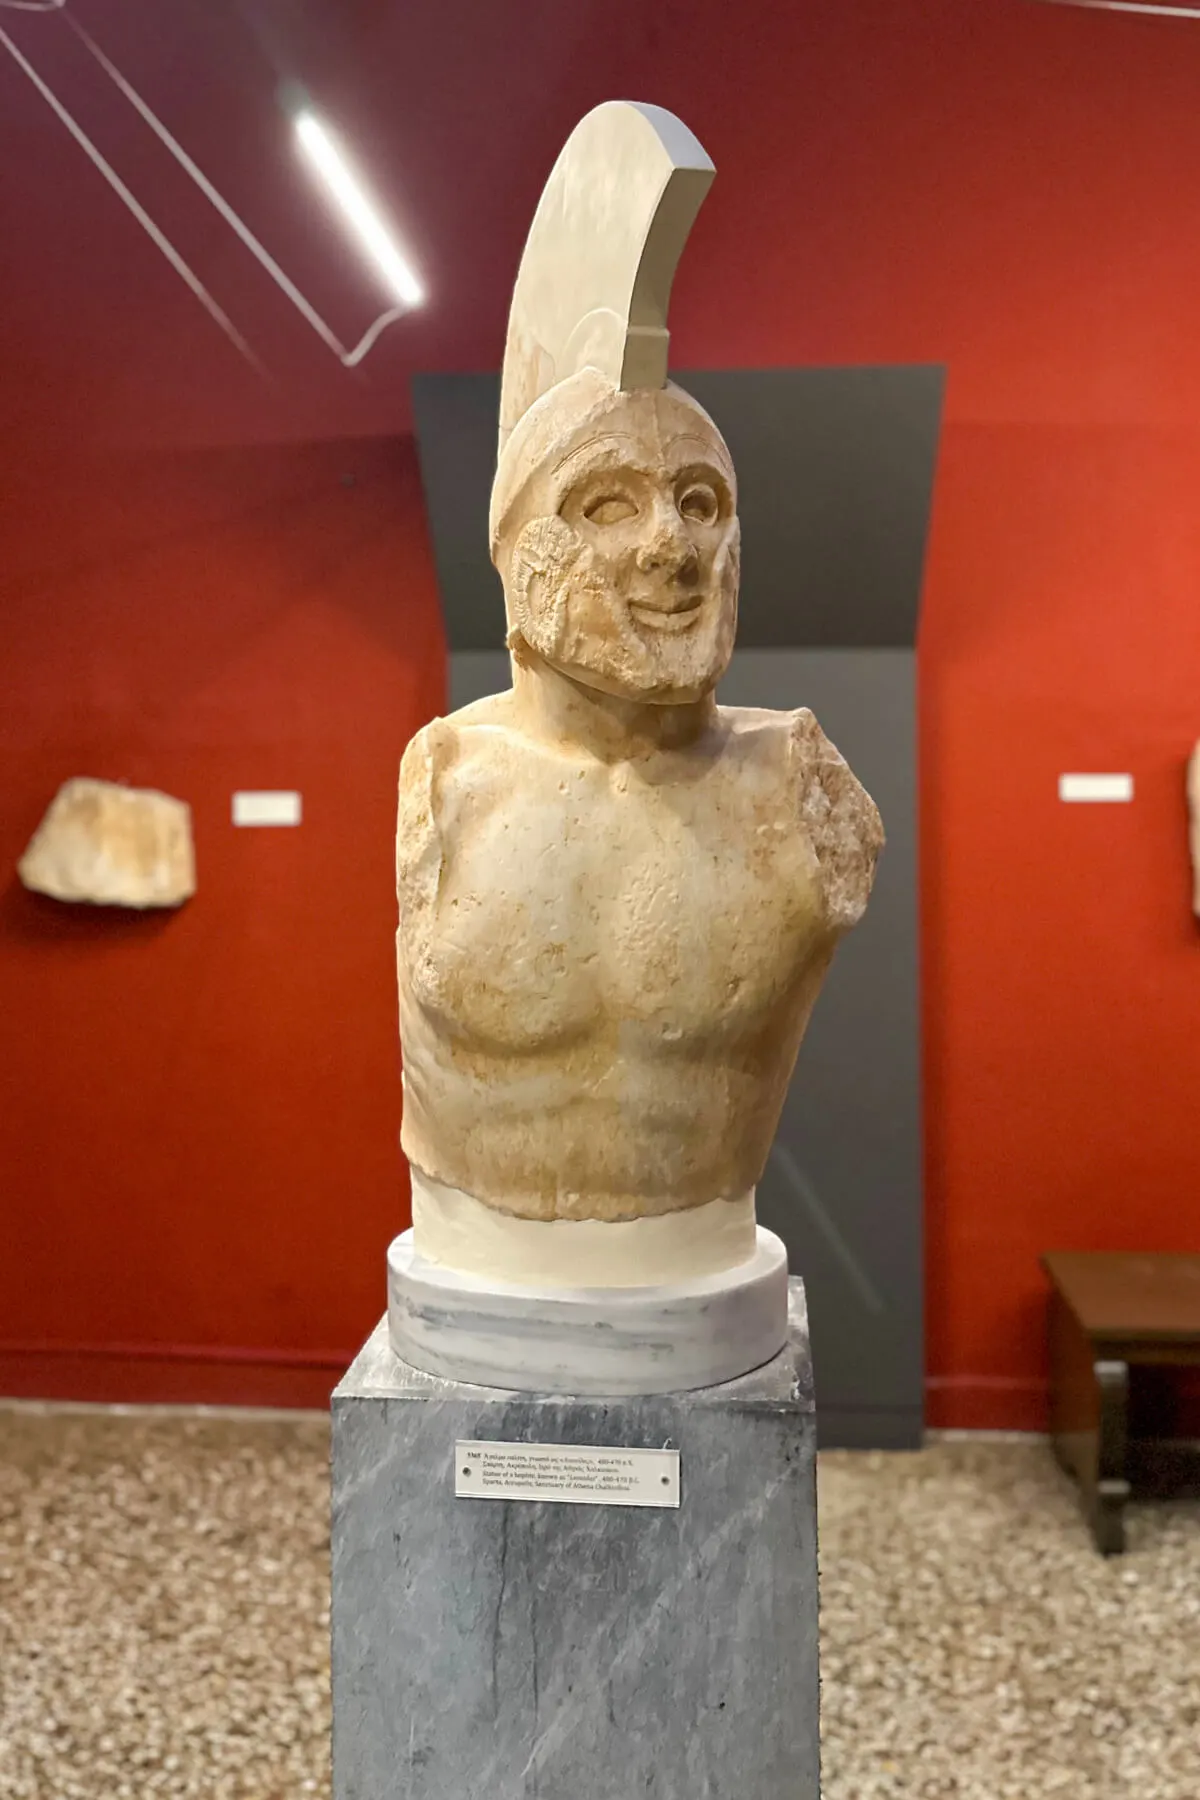 The statue found near the Acropolis of Sparta believed to be Leonidas